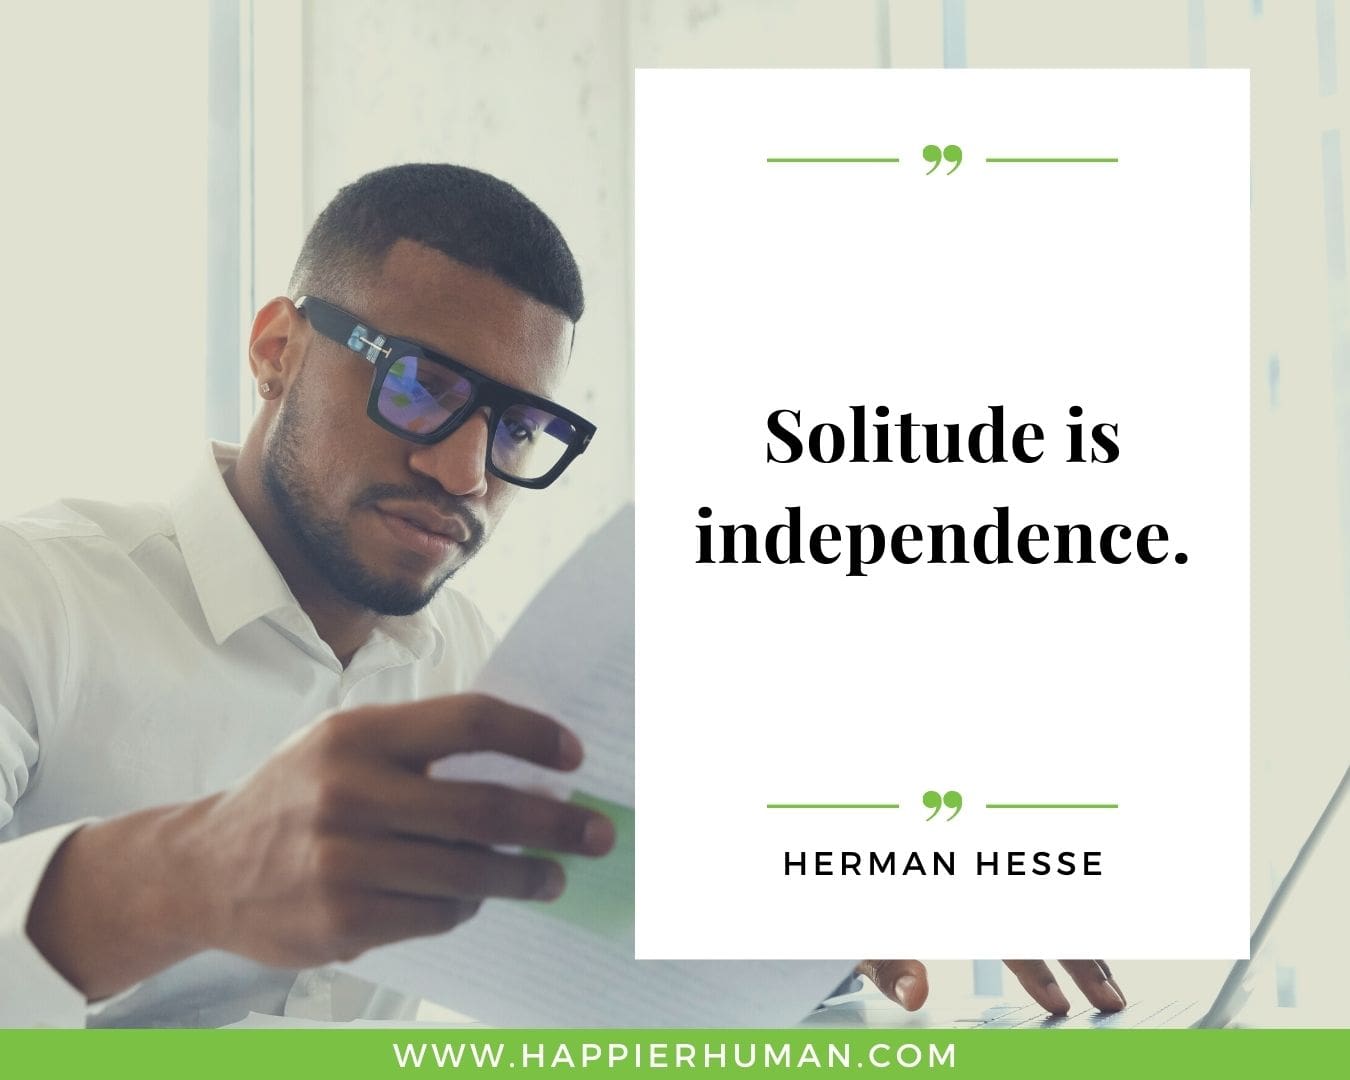 Loneliness Quotes - “Solitude is independence.” – Herman Hesse